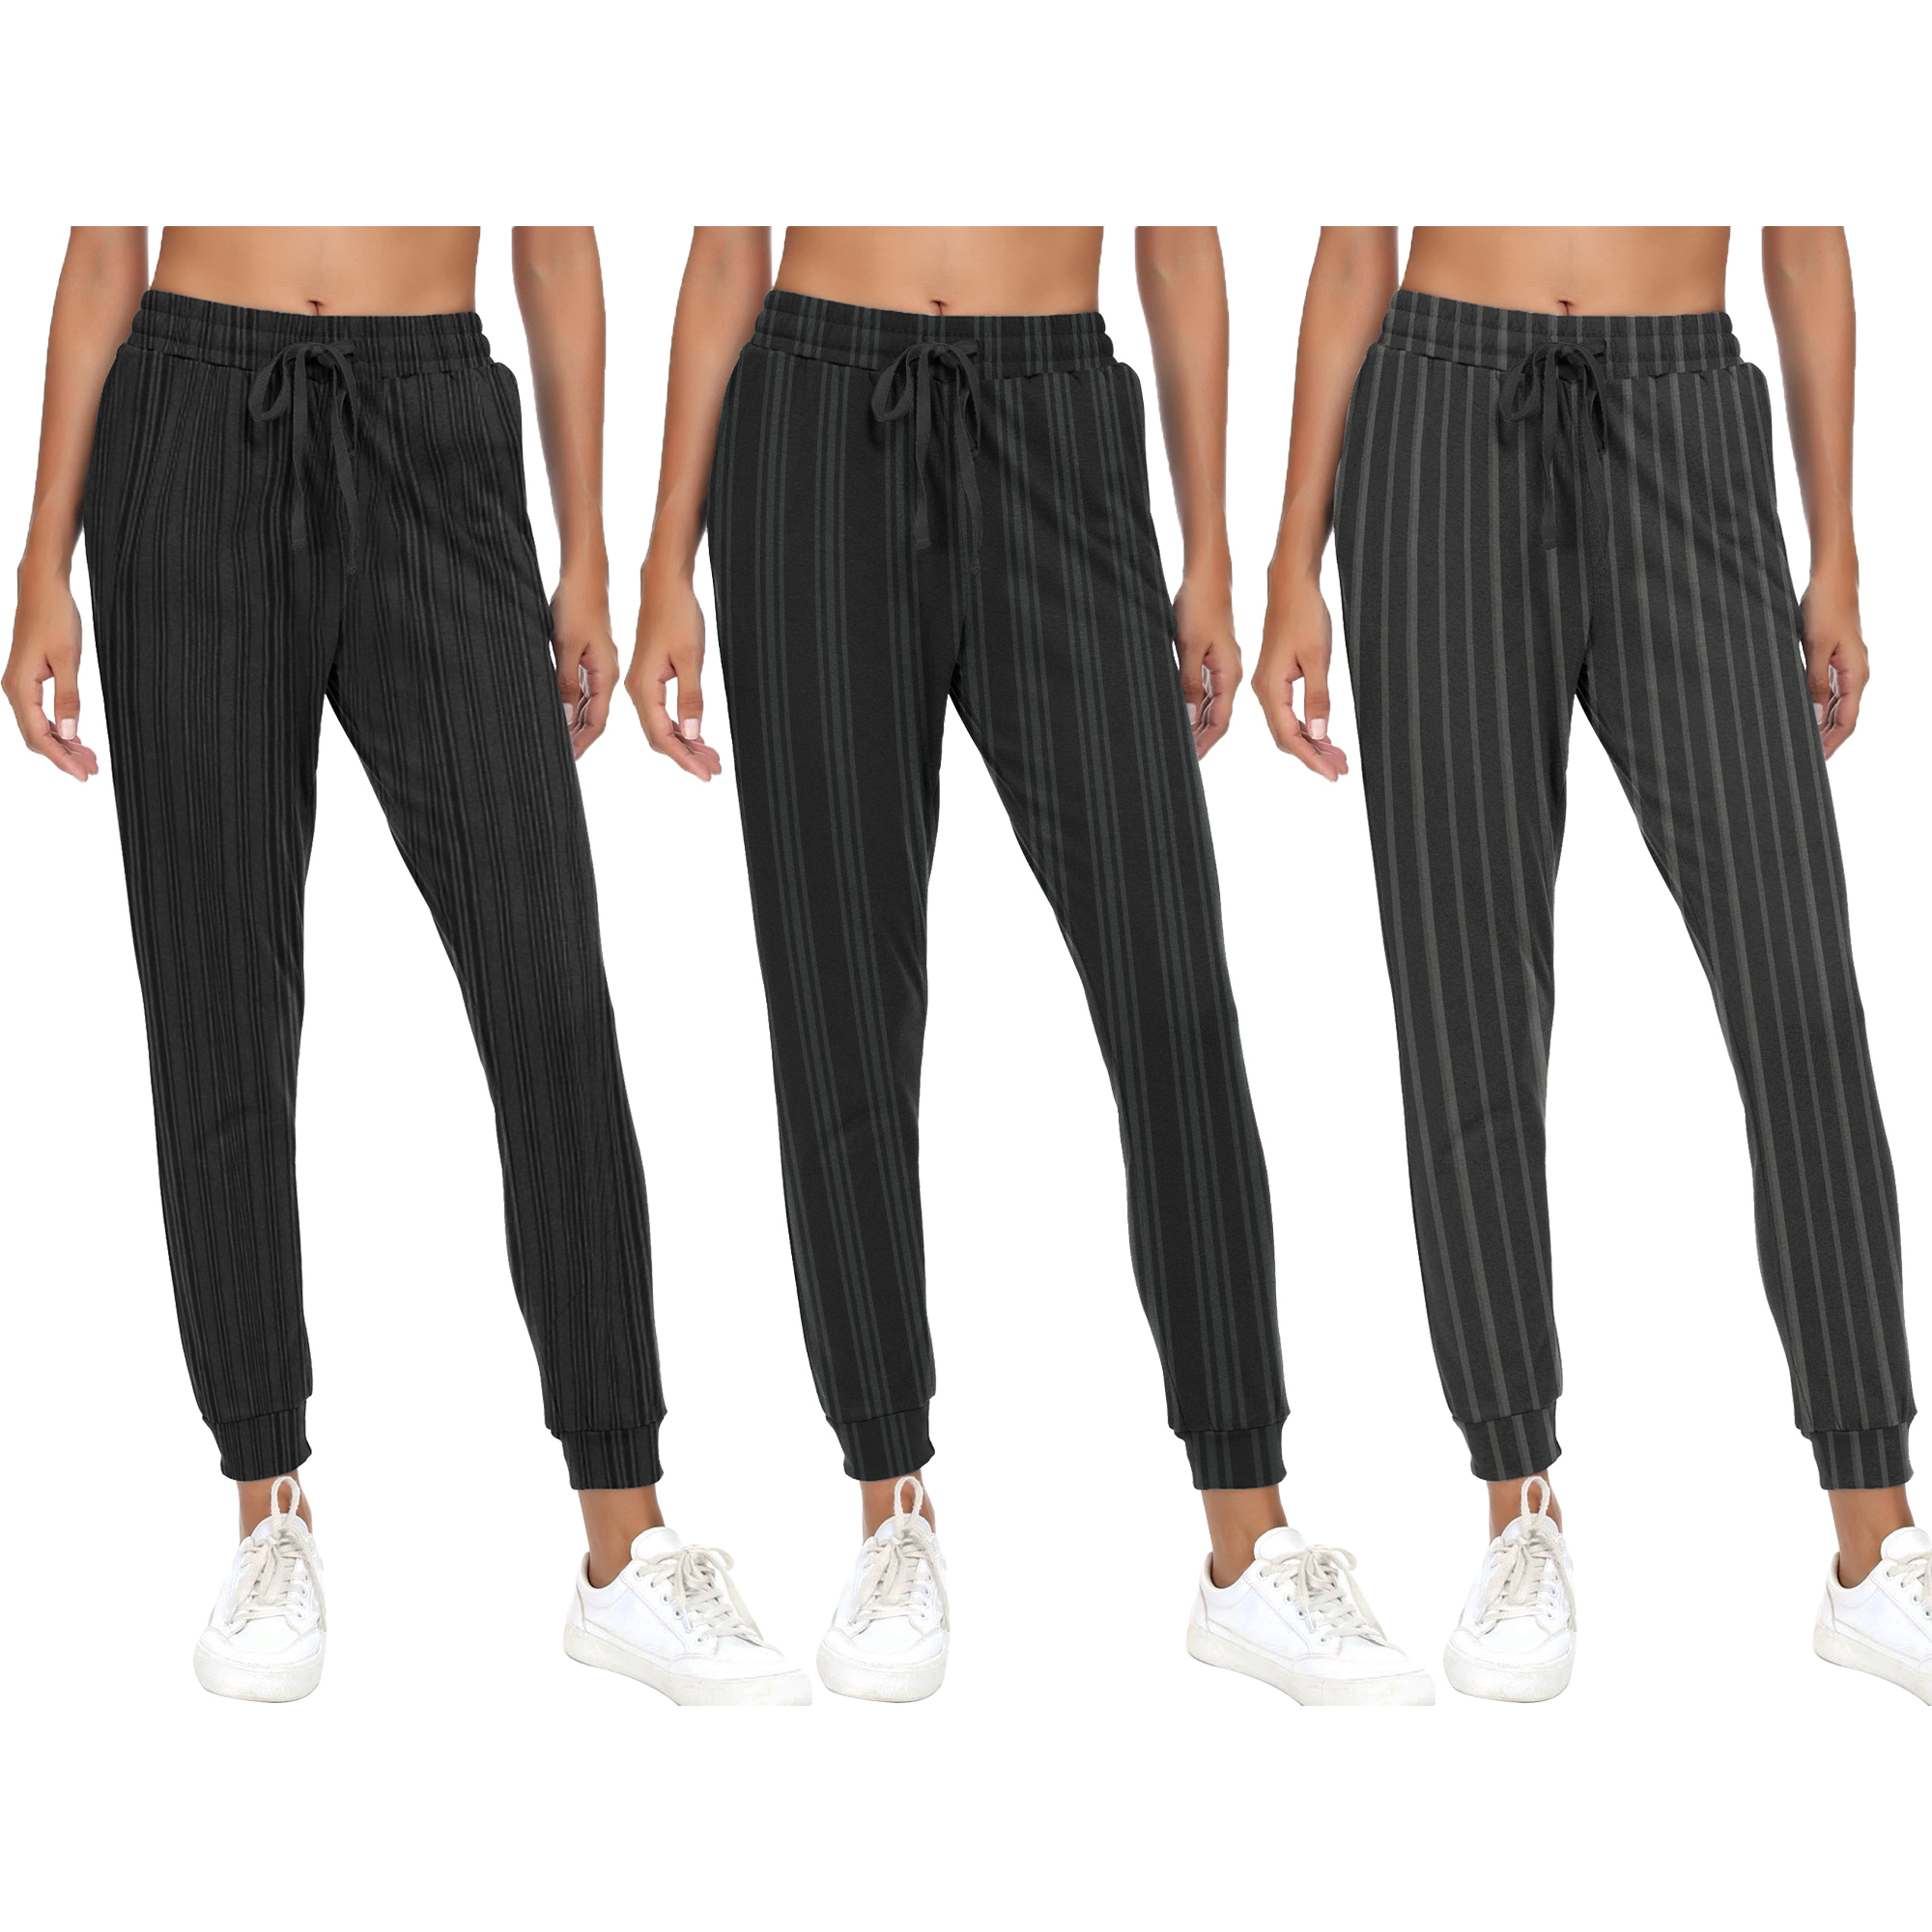 2-Pack Women's Striped Jogger Sweatpants With Pocket Drawstring Elastic Waist- Soft Breathable Casual Active Lounge Wear Ladies Track Pants